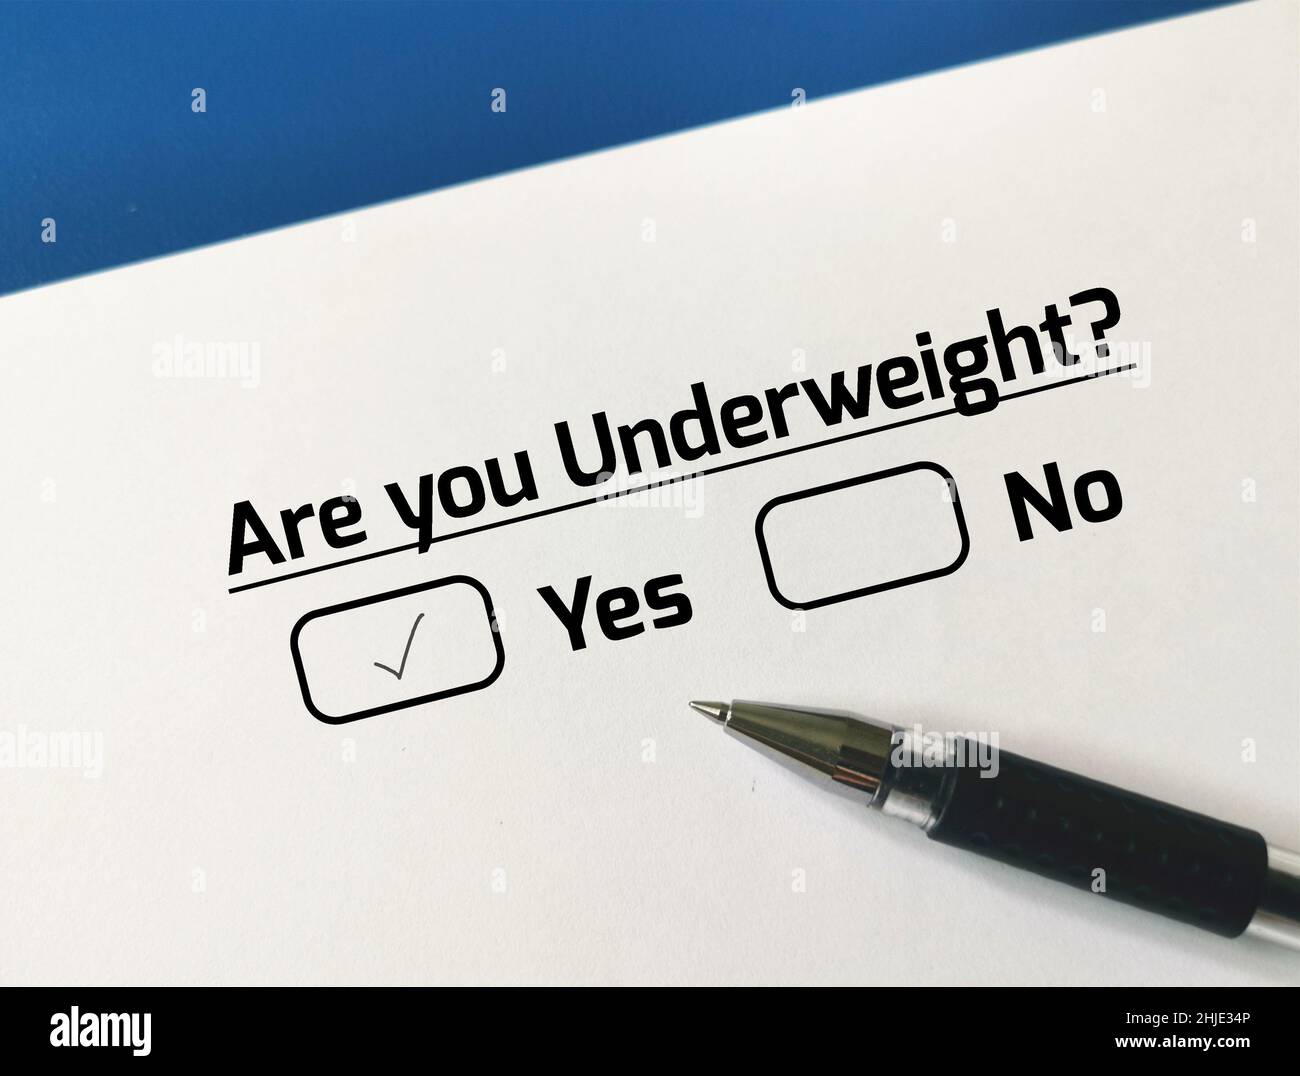 One person is answering question about health problem. The person is underweight. Stock Photo